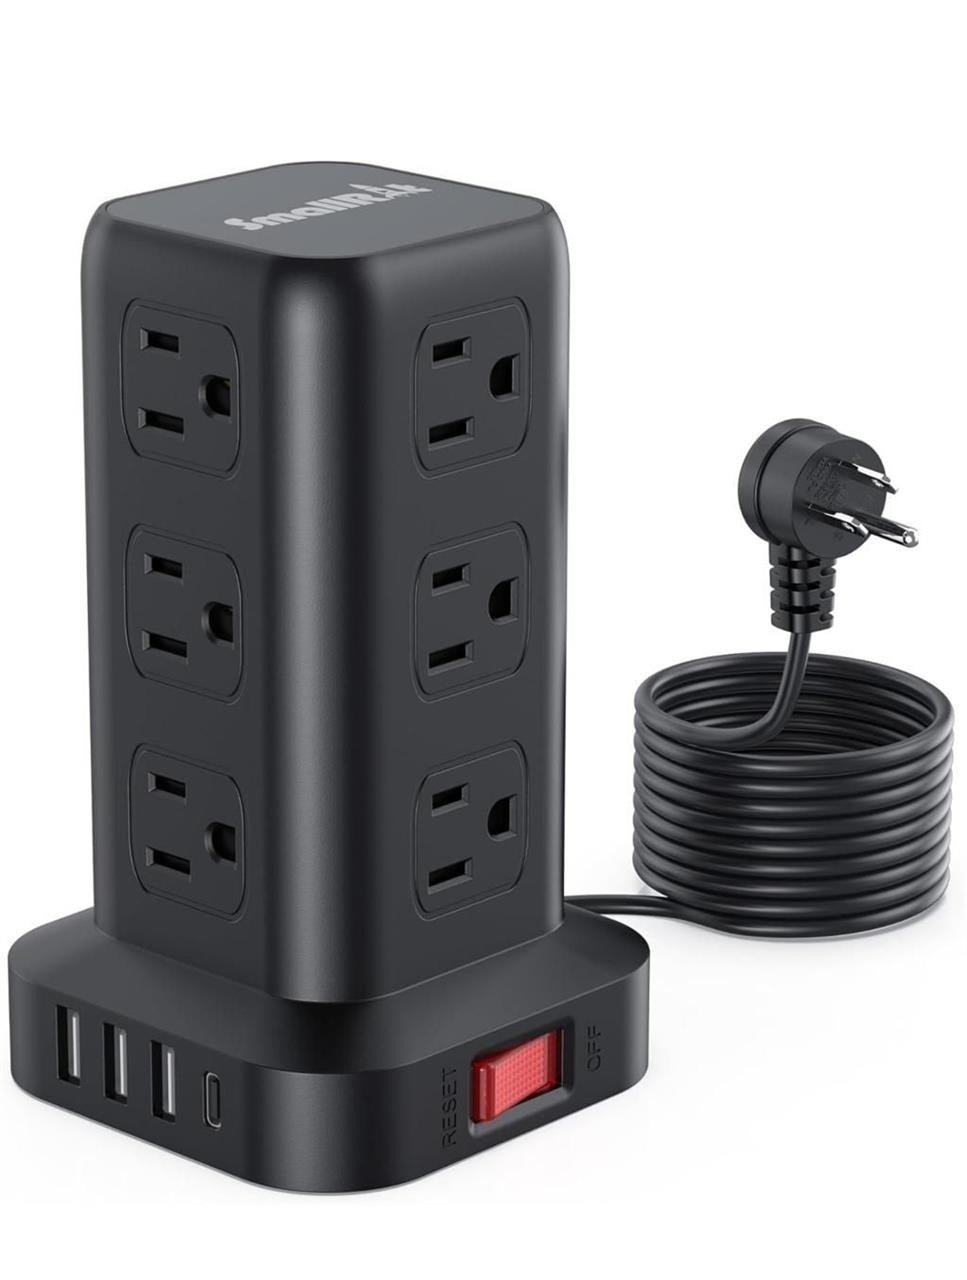 xtension Cord with Multiple Outlets  Surge